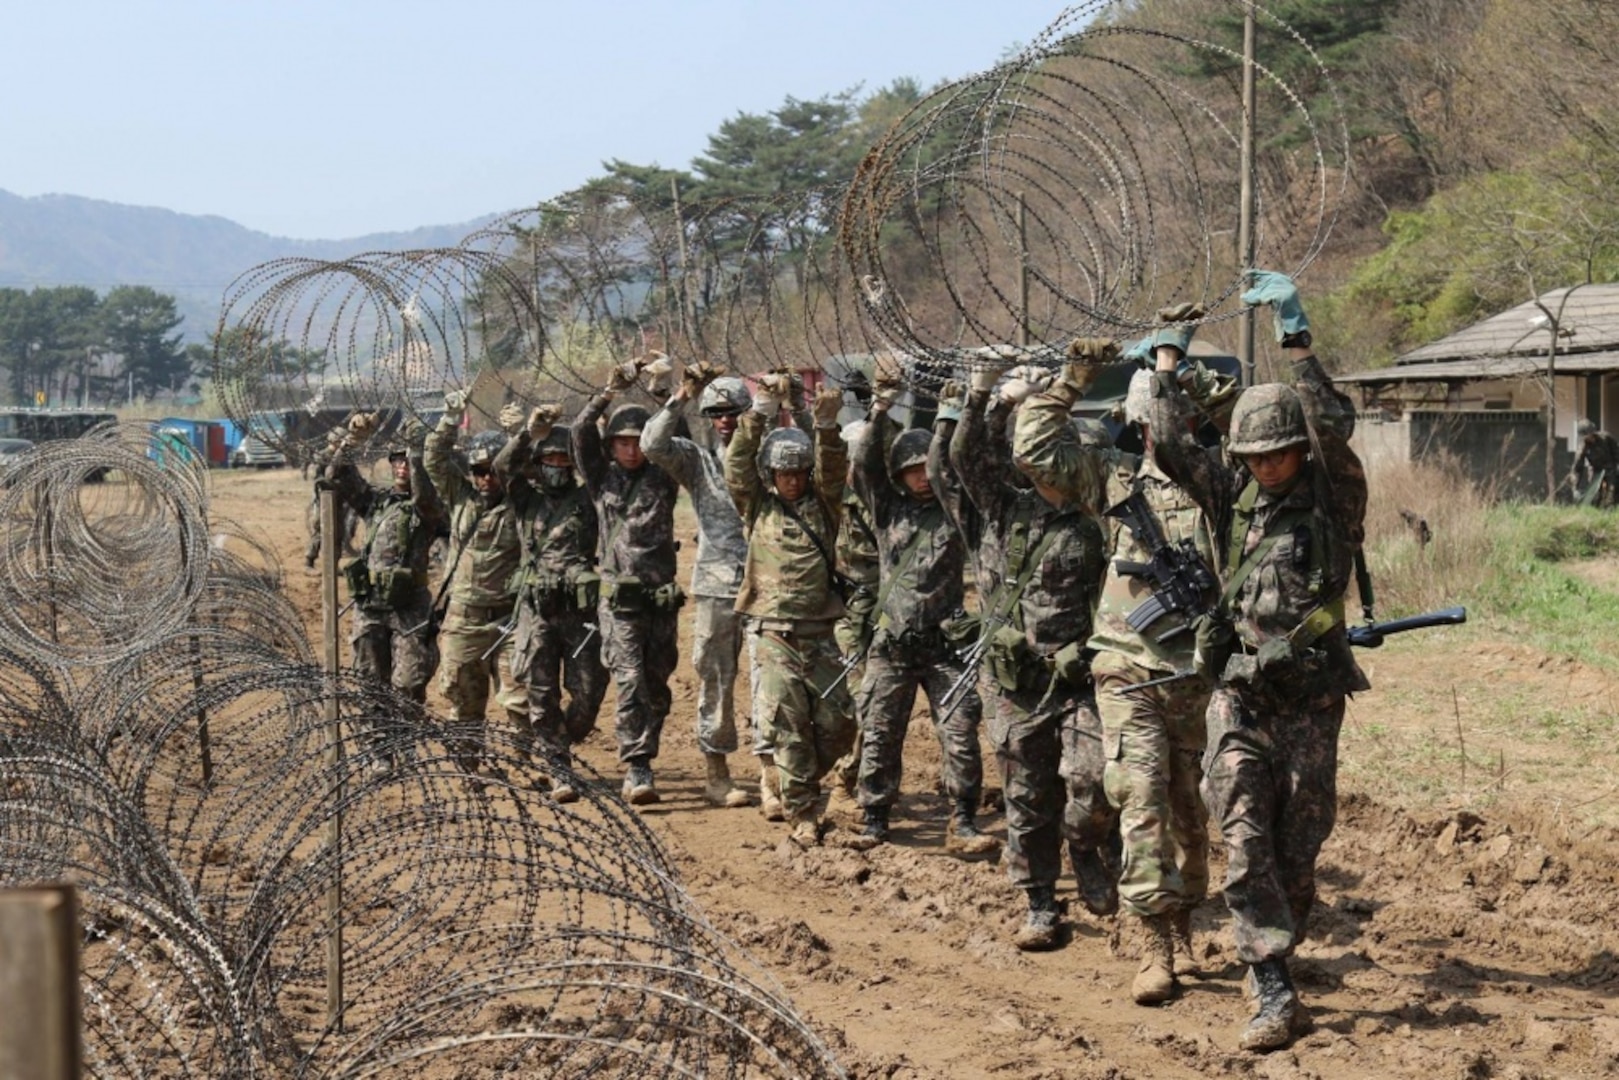 Soldiers from 2ID Sustainment Brigade and the Republic of Korea Army 2nd Logistics Support Command construct their field site, April 8, 2017, in preparation for a Combined Distribution Exercise near Pohang, South Korea. The CDEx is part of exercise Operation Pacific Reach '17 and aims to strengthen the U.S. and ROK partnership and interoperability.